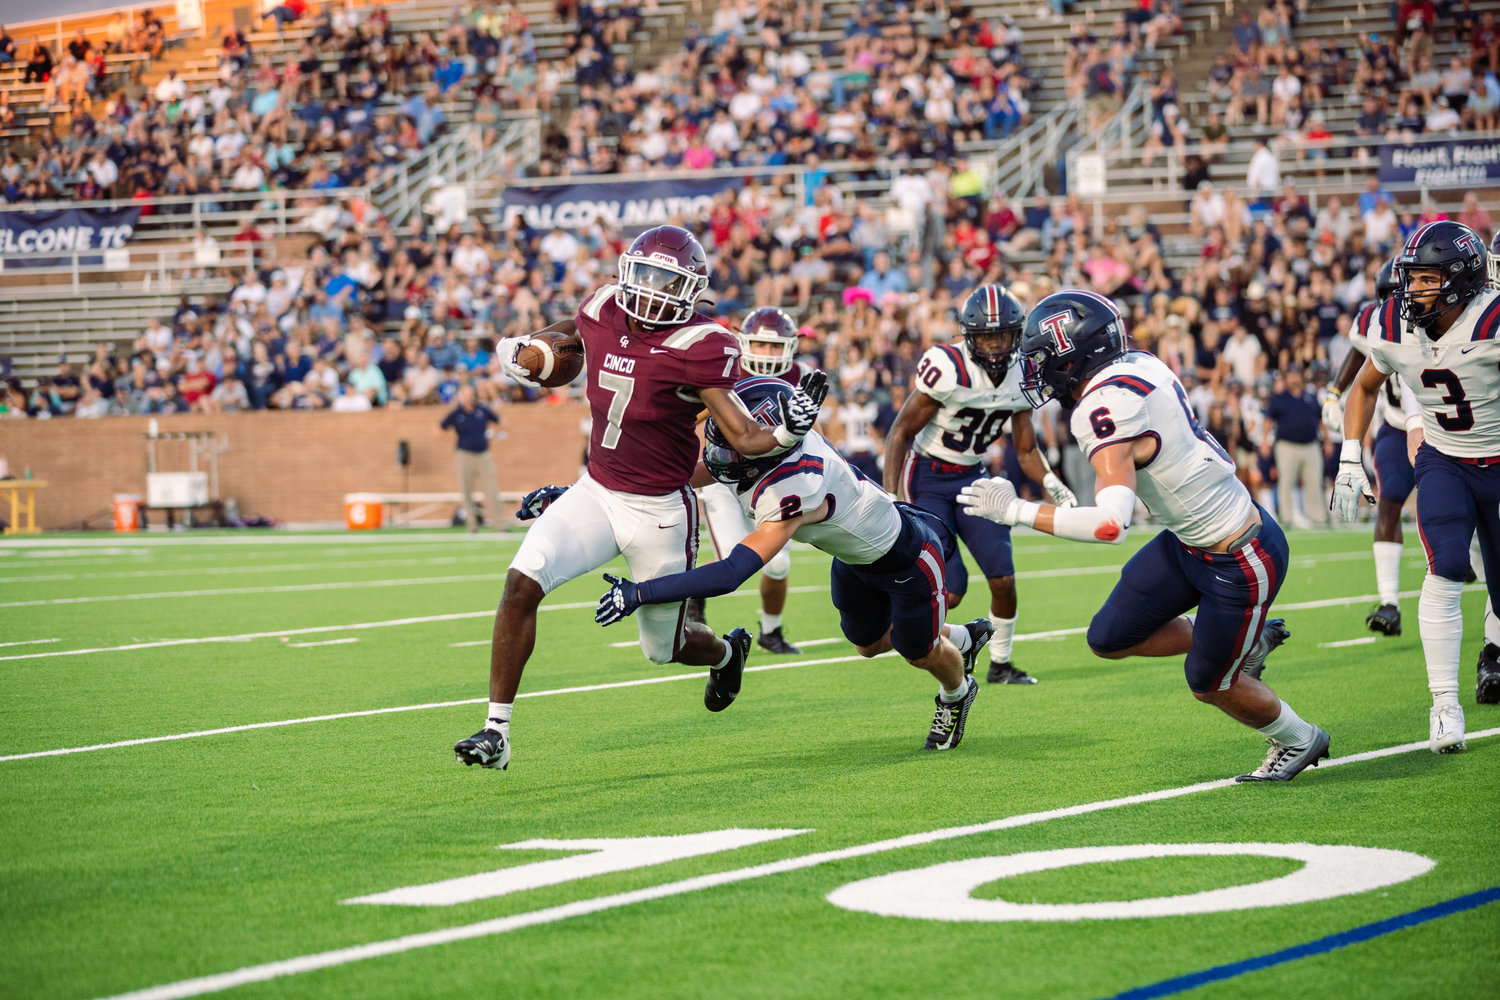 Cinco Ranch’s Sam McKnight breaks a tackle during Friday’s game between Cinco Ranch and Tompkins at Rhodes Stadium.